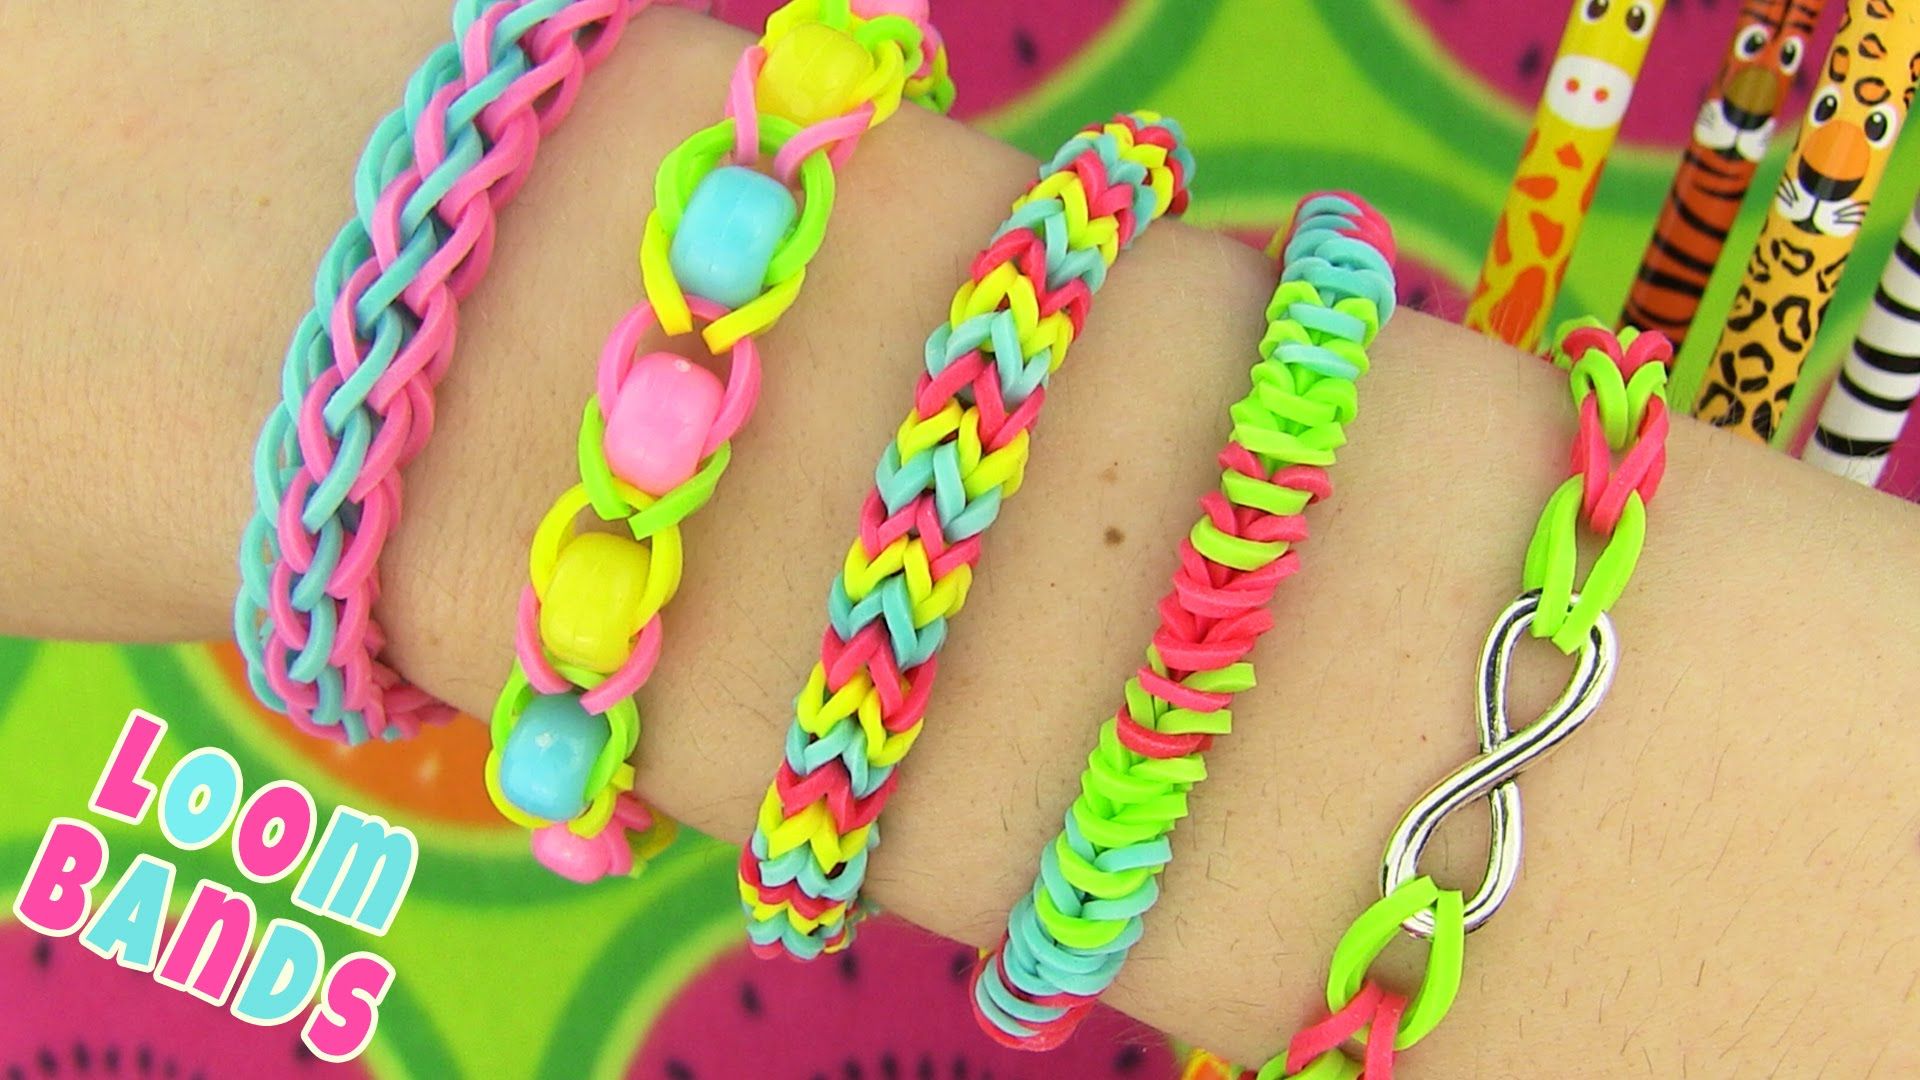 How to Make Loom Bands. 5 Easy Rainbow Loom Bracelet Designs without a Loom